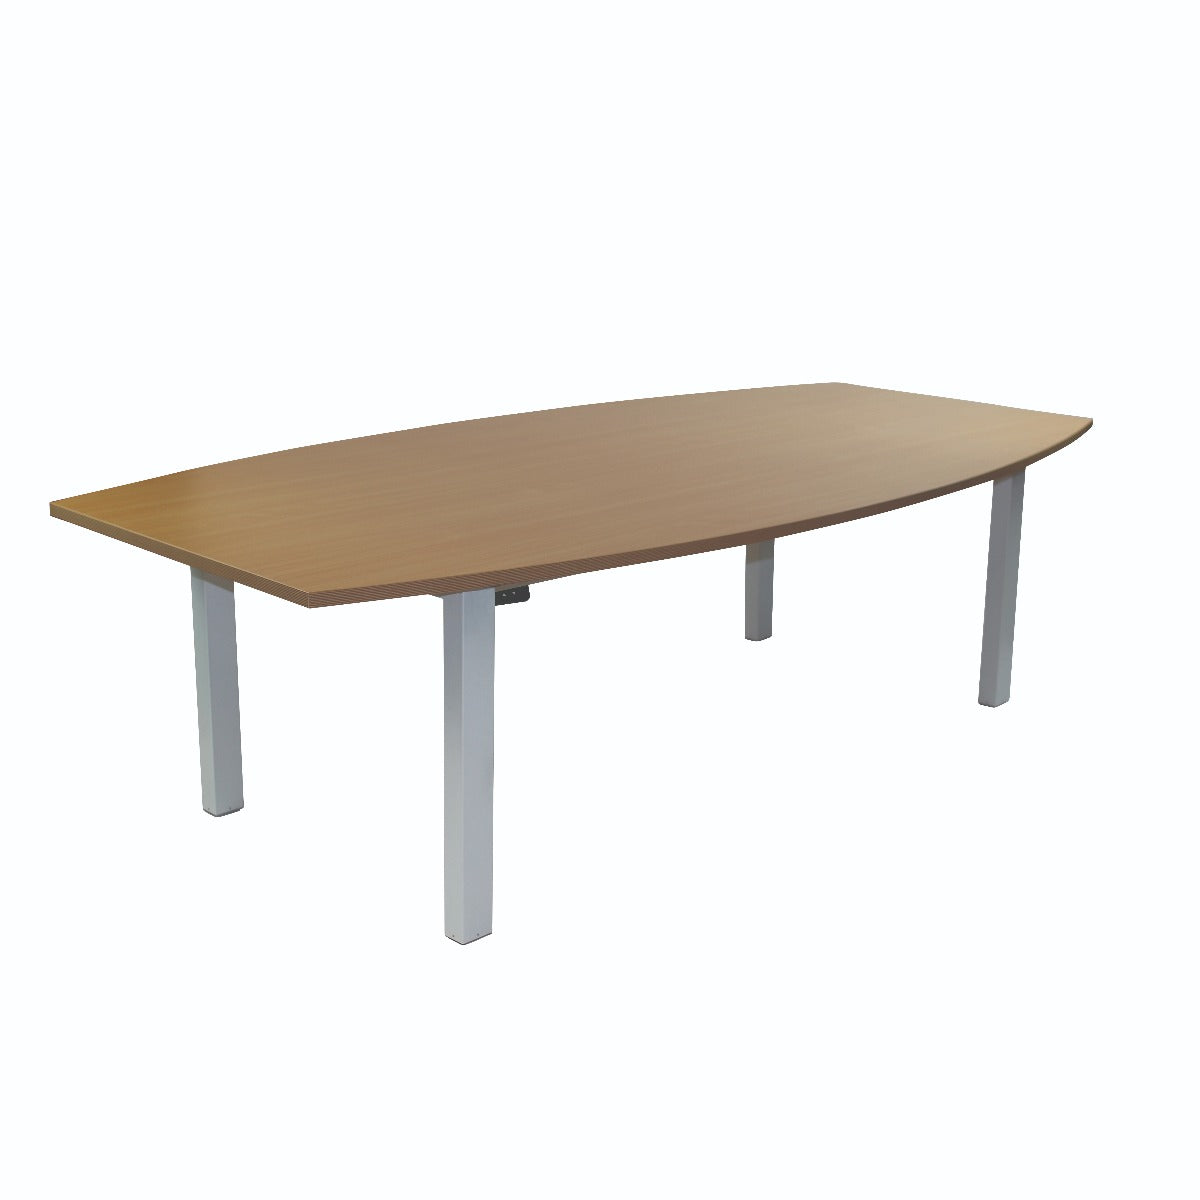 Talk It Up Electric Sit Stand Meeting Table and frame options